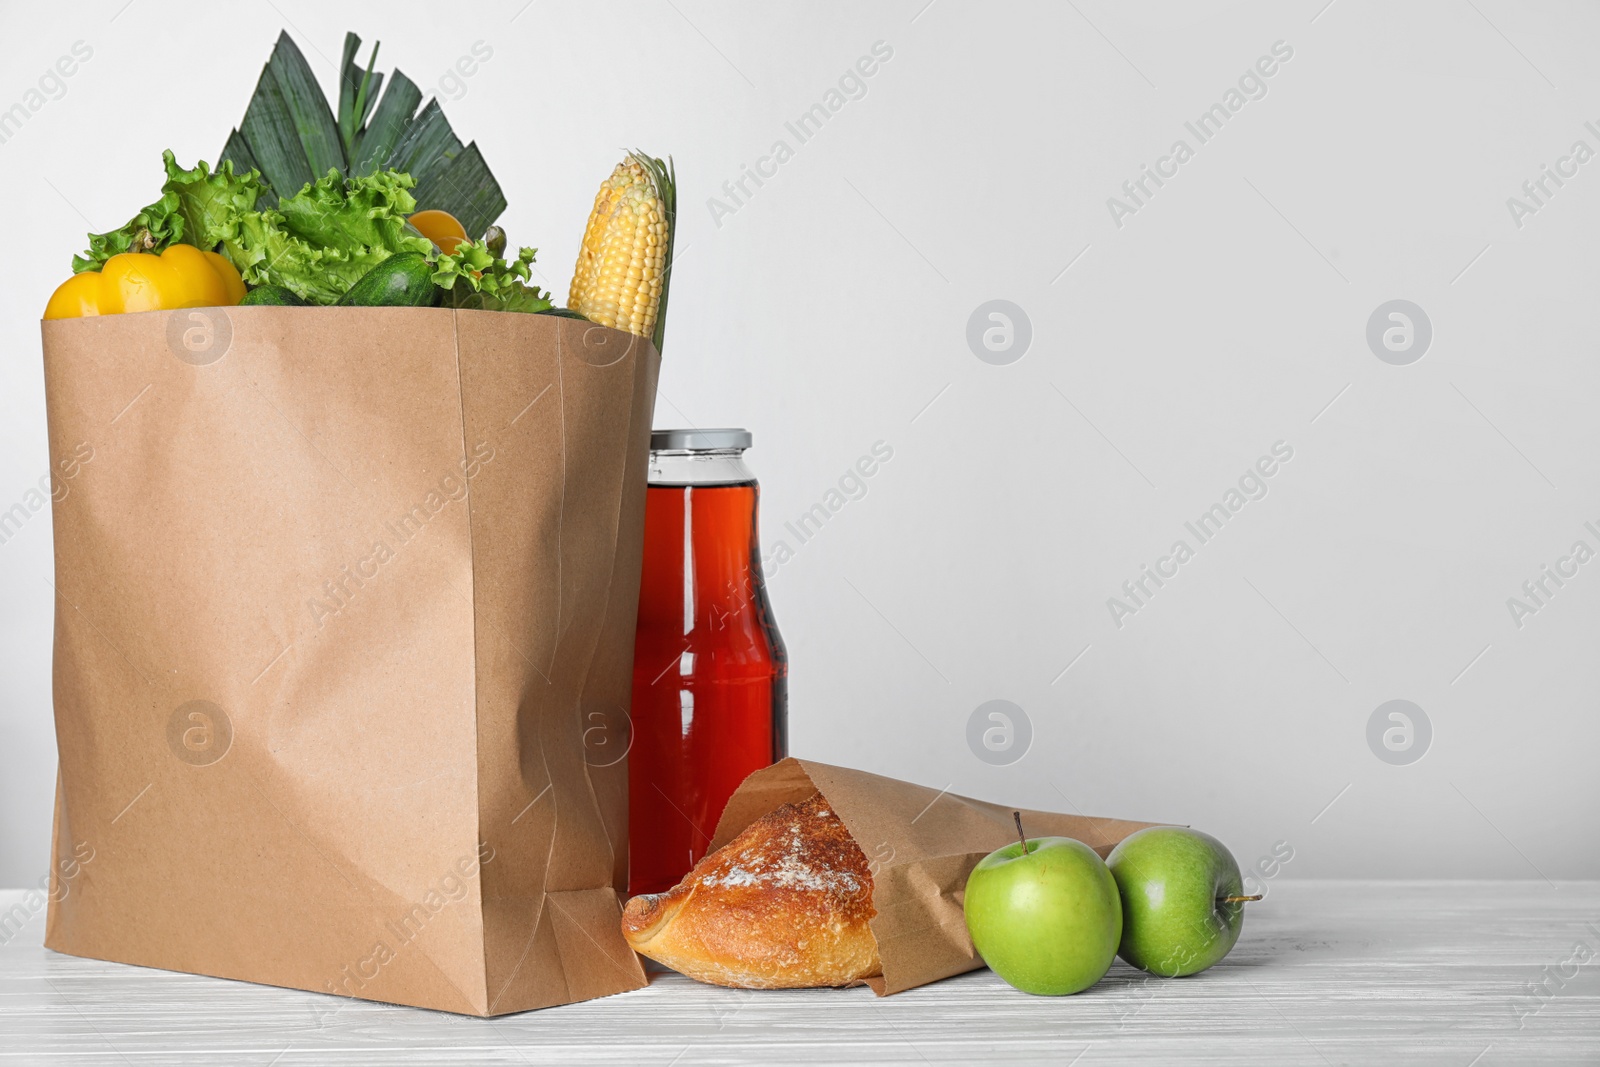 Photo of Paper bag with fresh vegetables and other products on white wooden table against light background, space for text